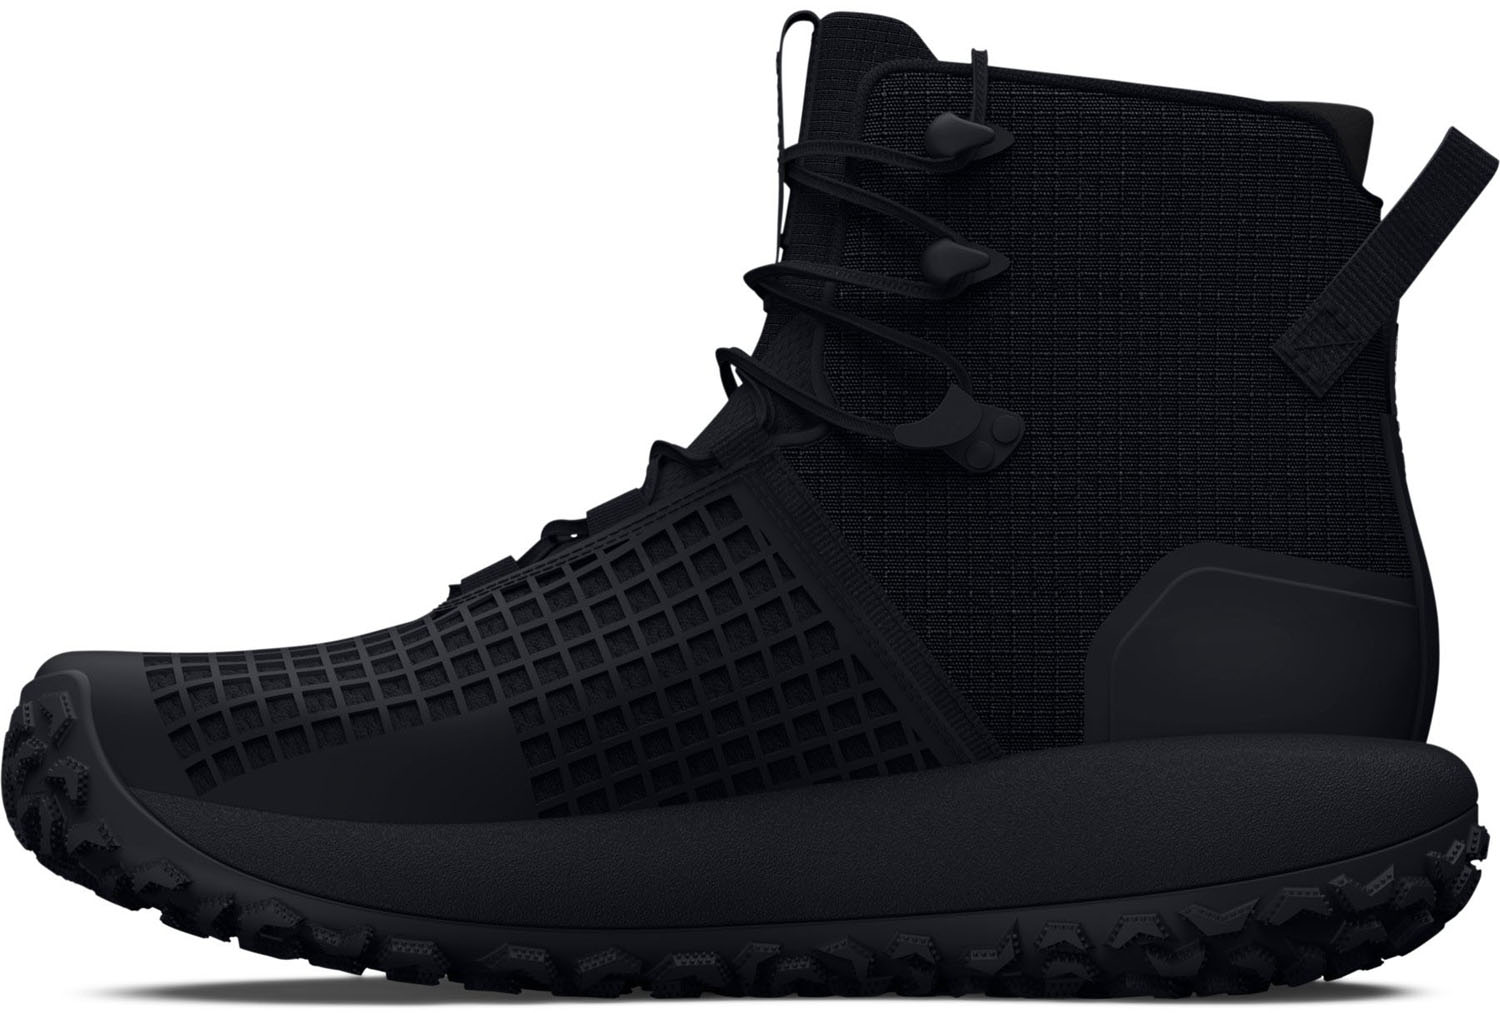 Under Armour - Mens Hovr Infil Boots